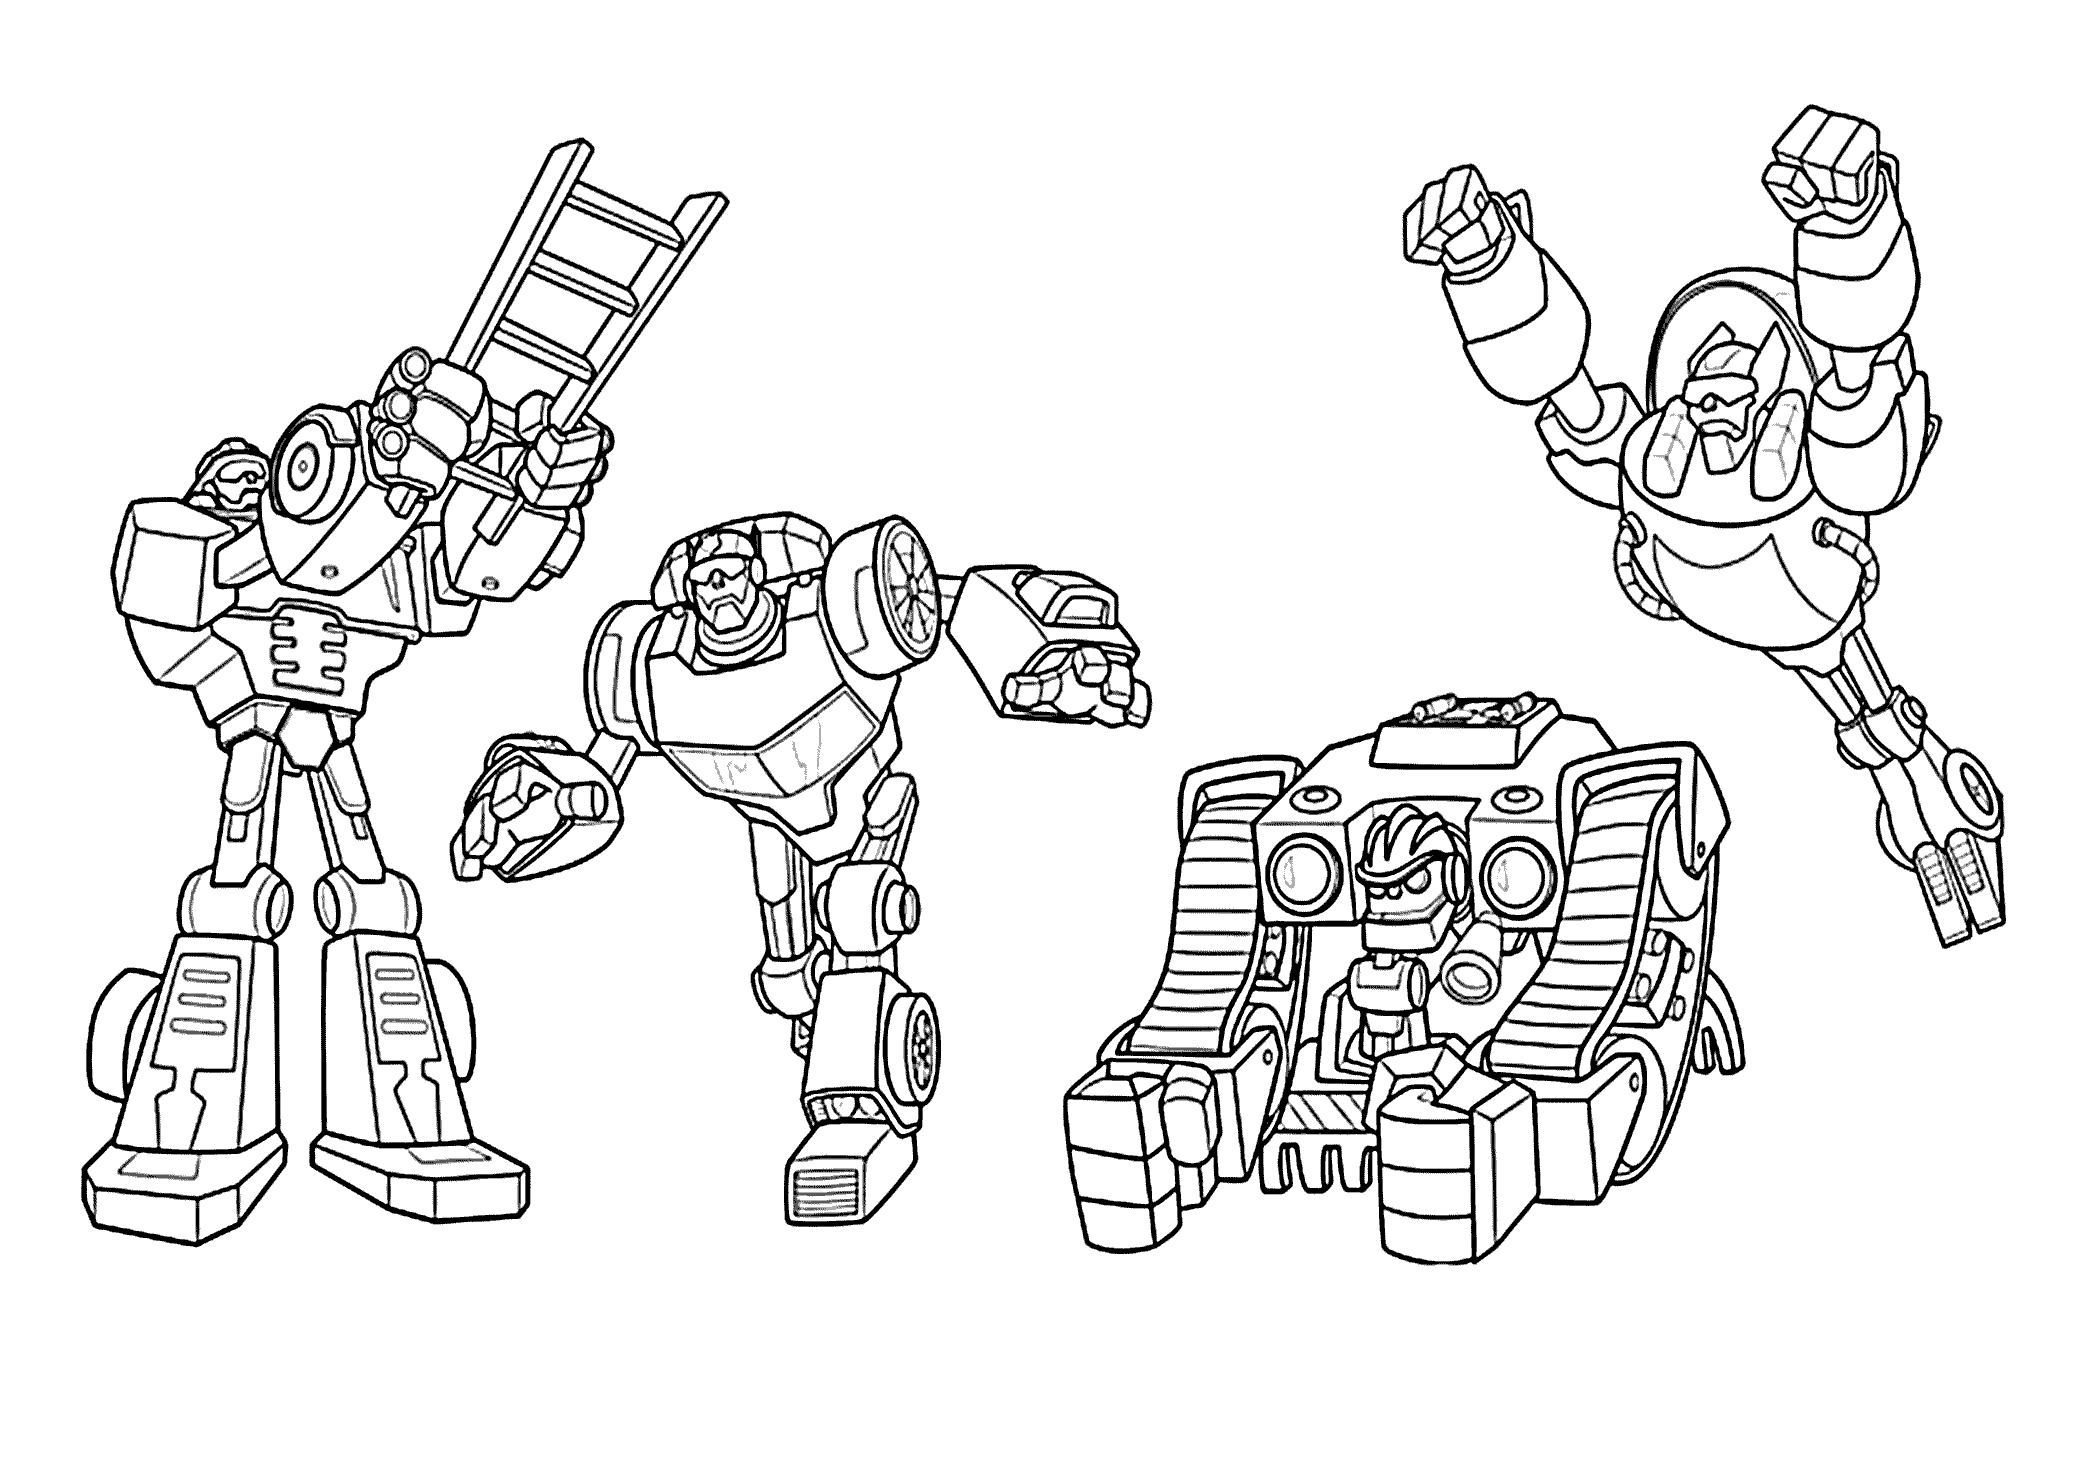 All Rescue Bots Coloring Pages For Kids Printable Free Transformers Rescue Bots Birth